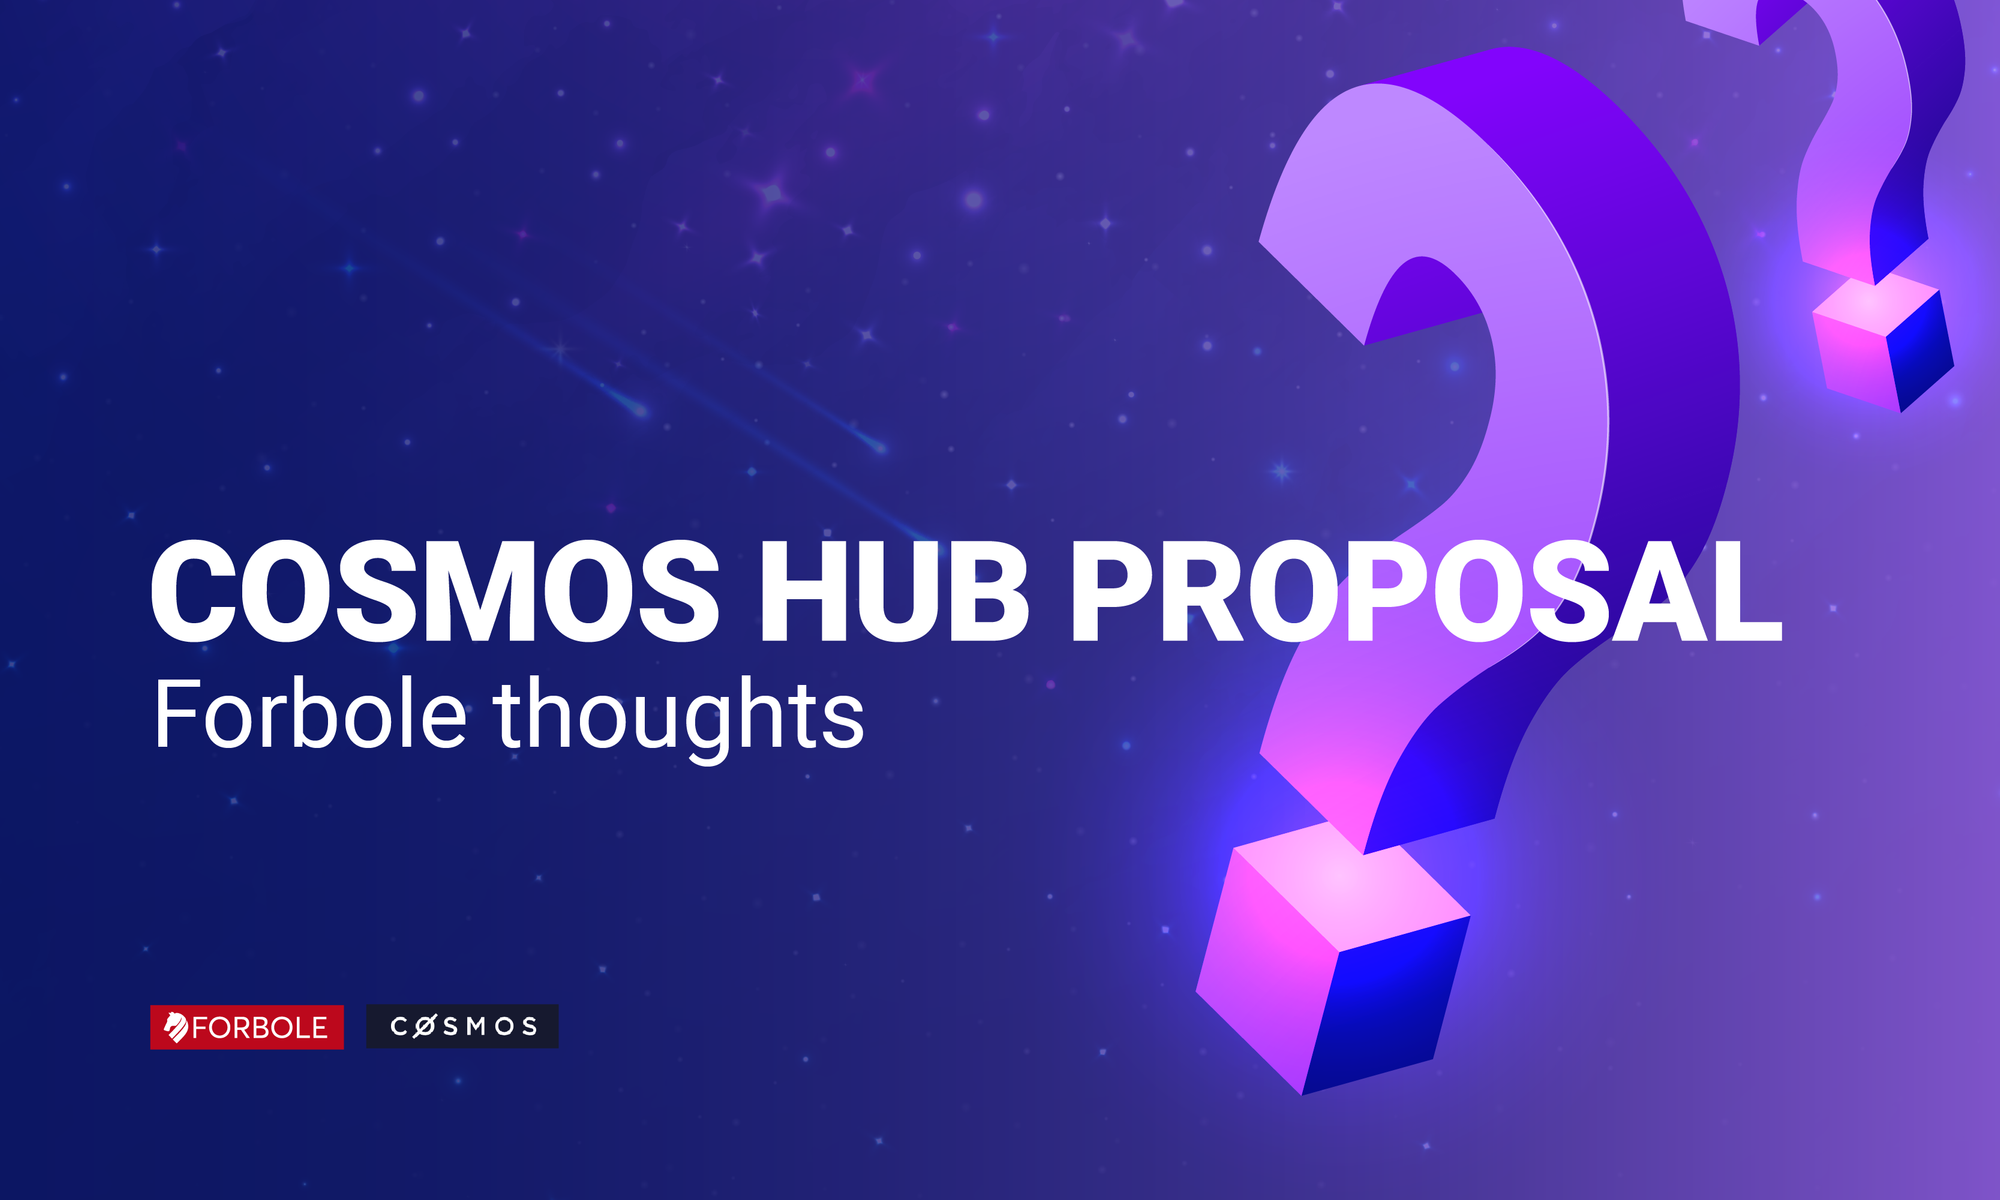 Forbole’s thought on Cosmos Hub Proposal 31 and 32